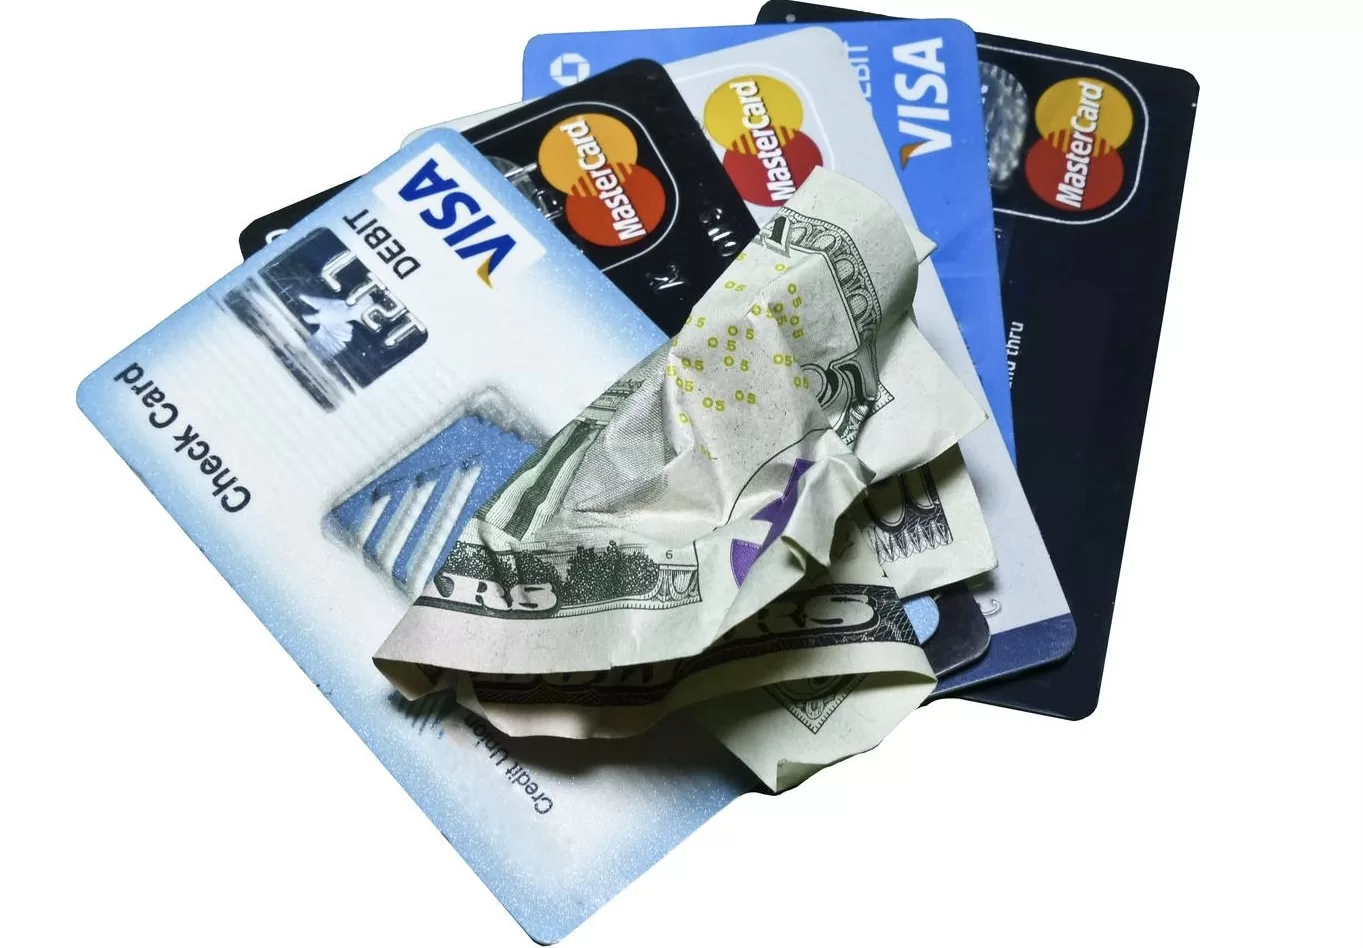 Best Credit Card Basic Cash Back or Points to Apply to Keep for Lifetime